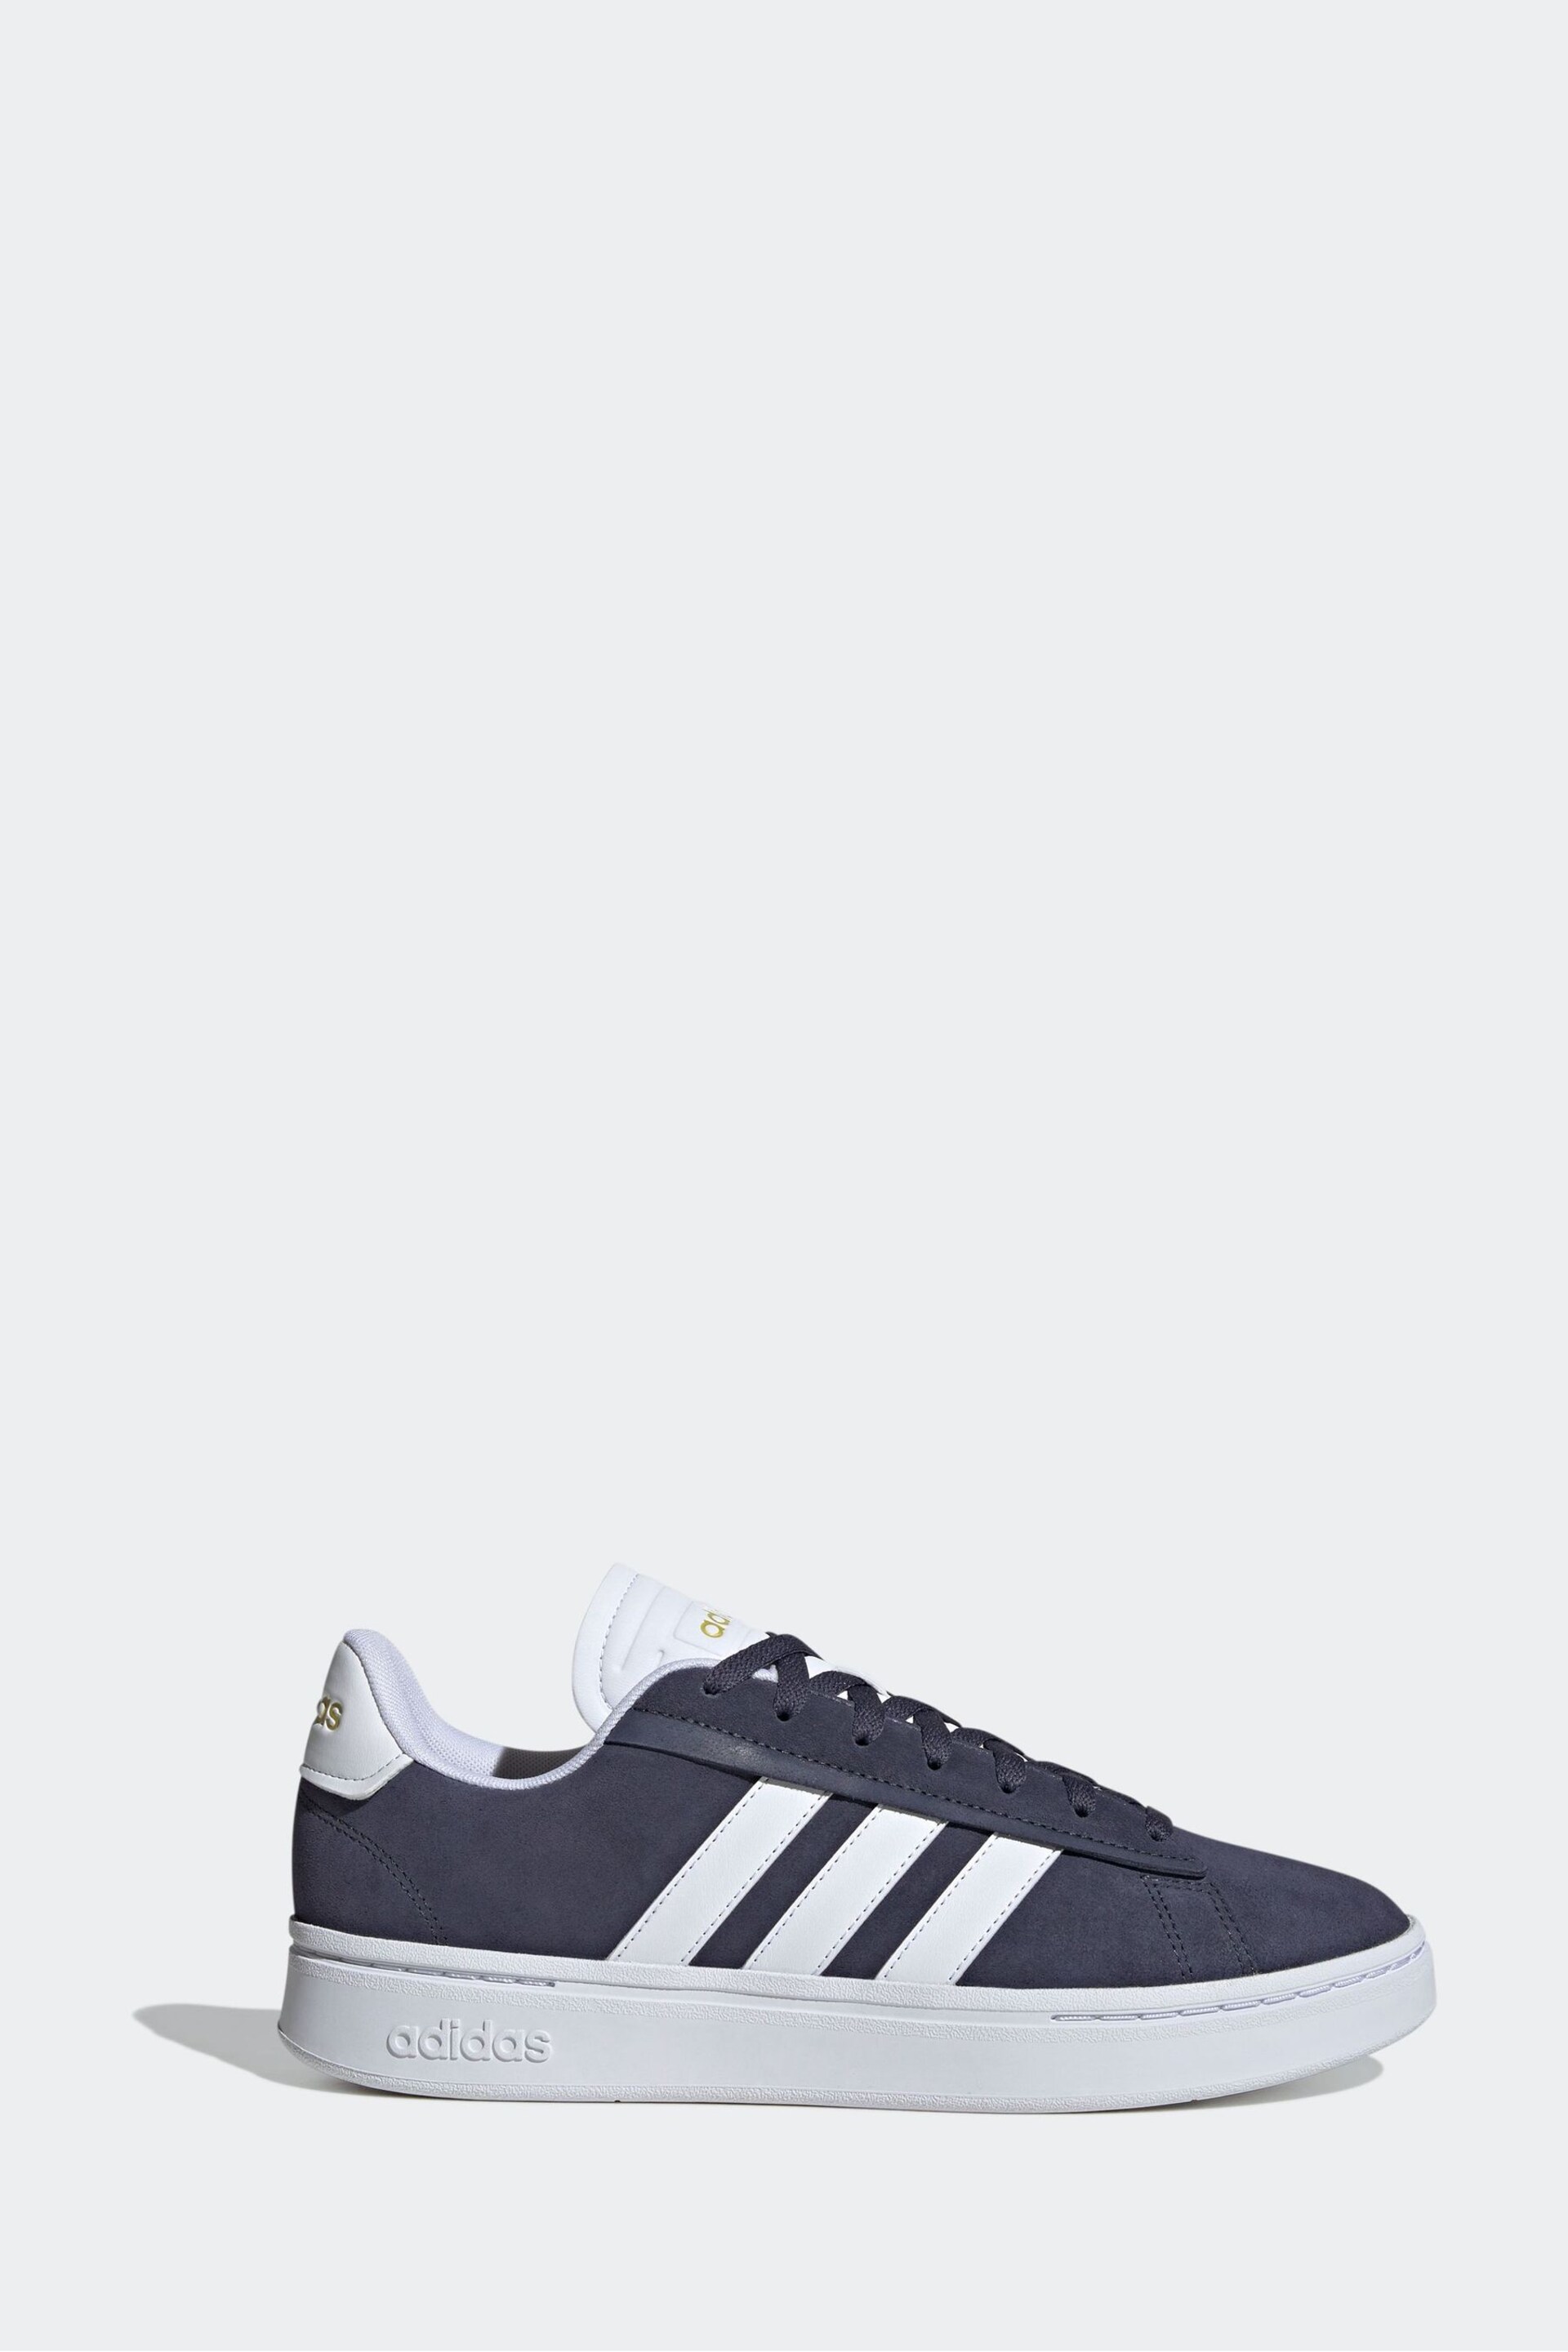 adidas Navy/White Sportswear Grand Court Alpha Trainers - Image 1 of 8